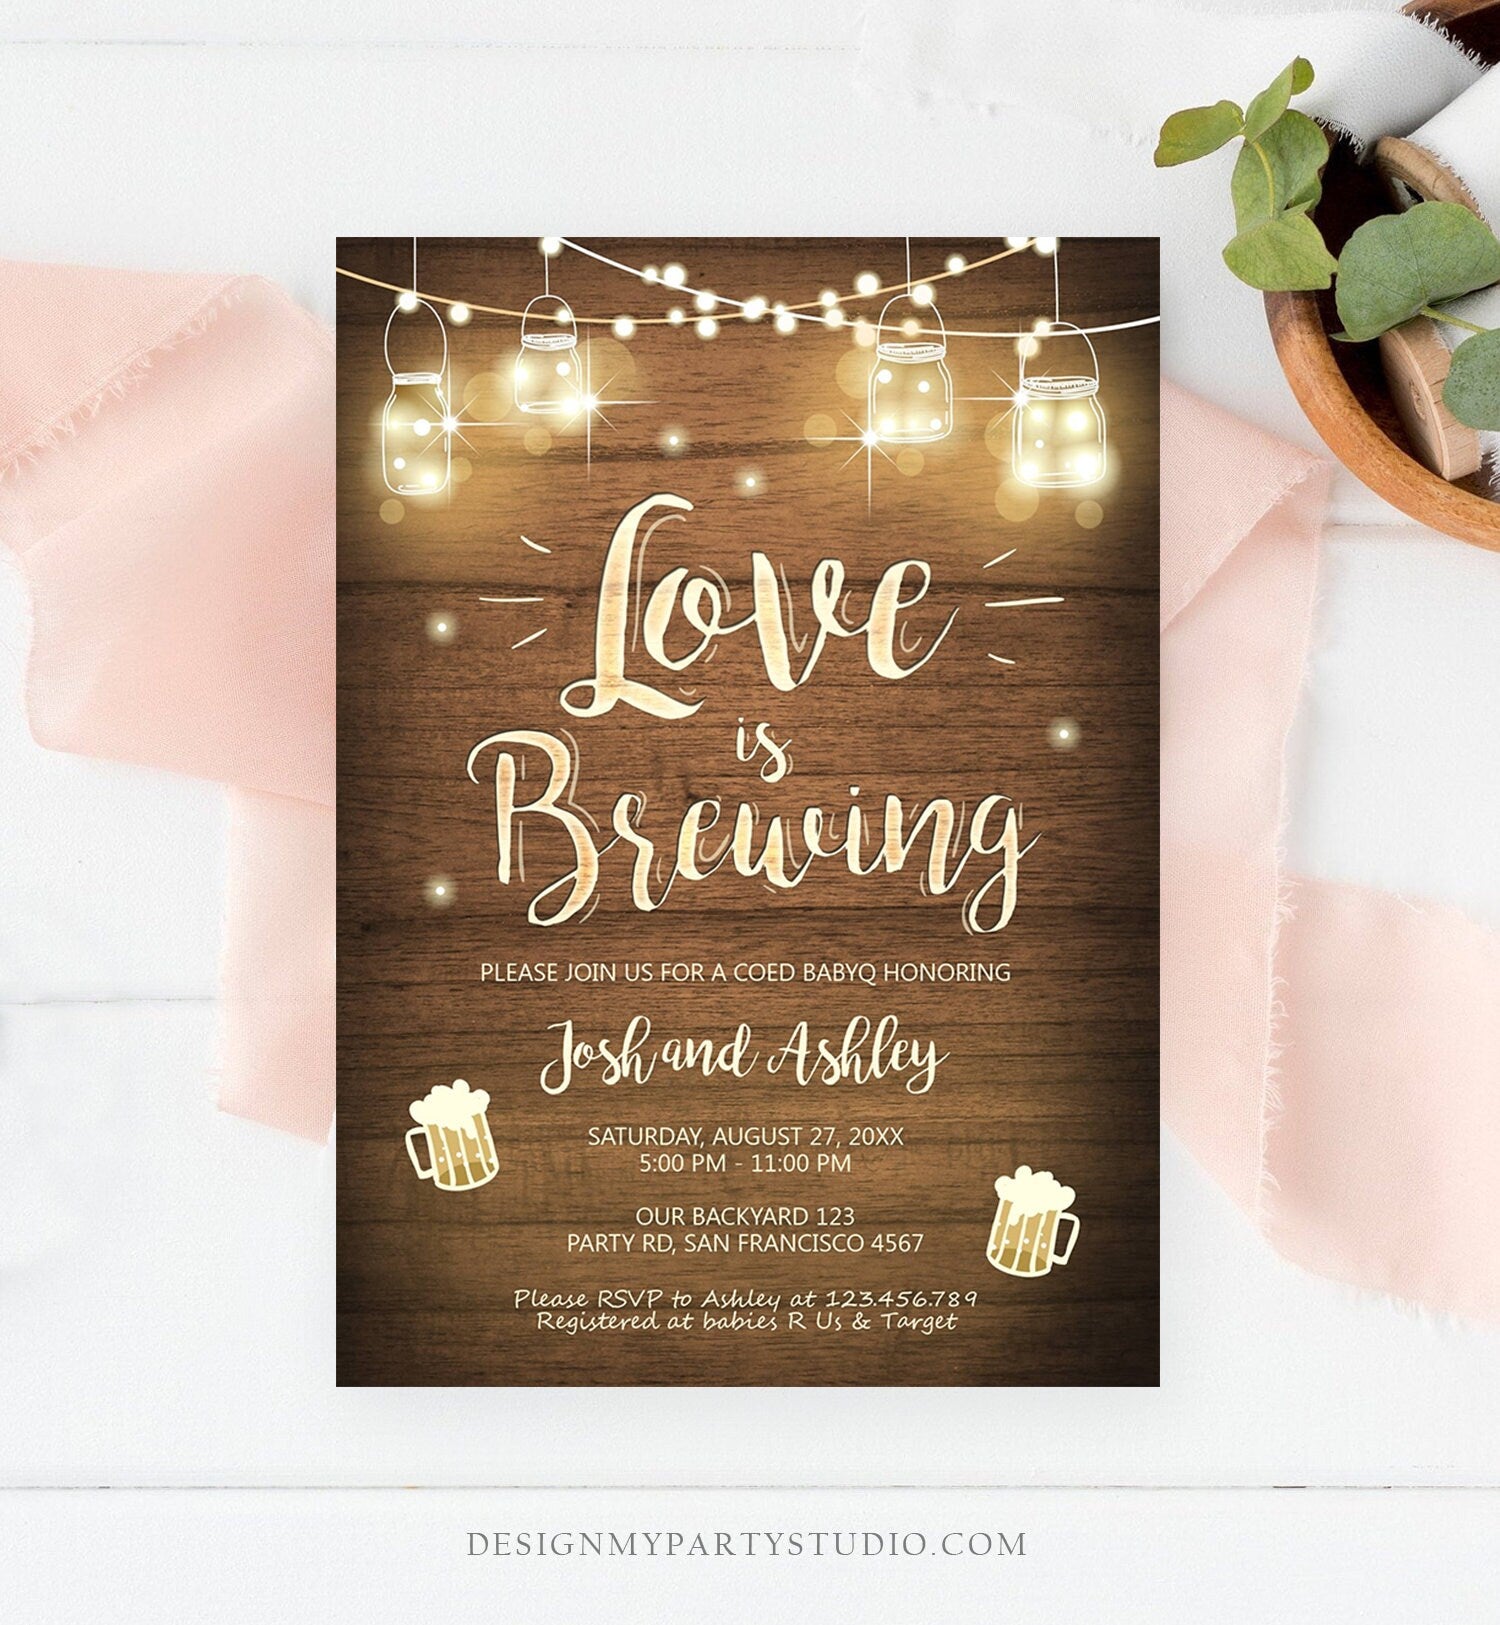 Editable Love is Brewing Invitation Bridal Shower Beer BBQ Rehearsal Dinner Wedding Couples Shower Rustic Download Print Template Corjl 0015